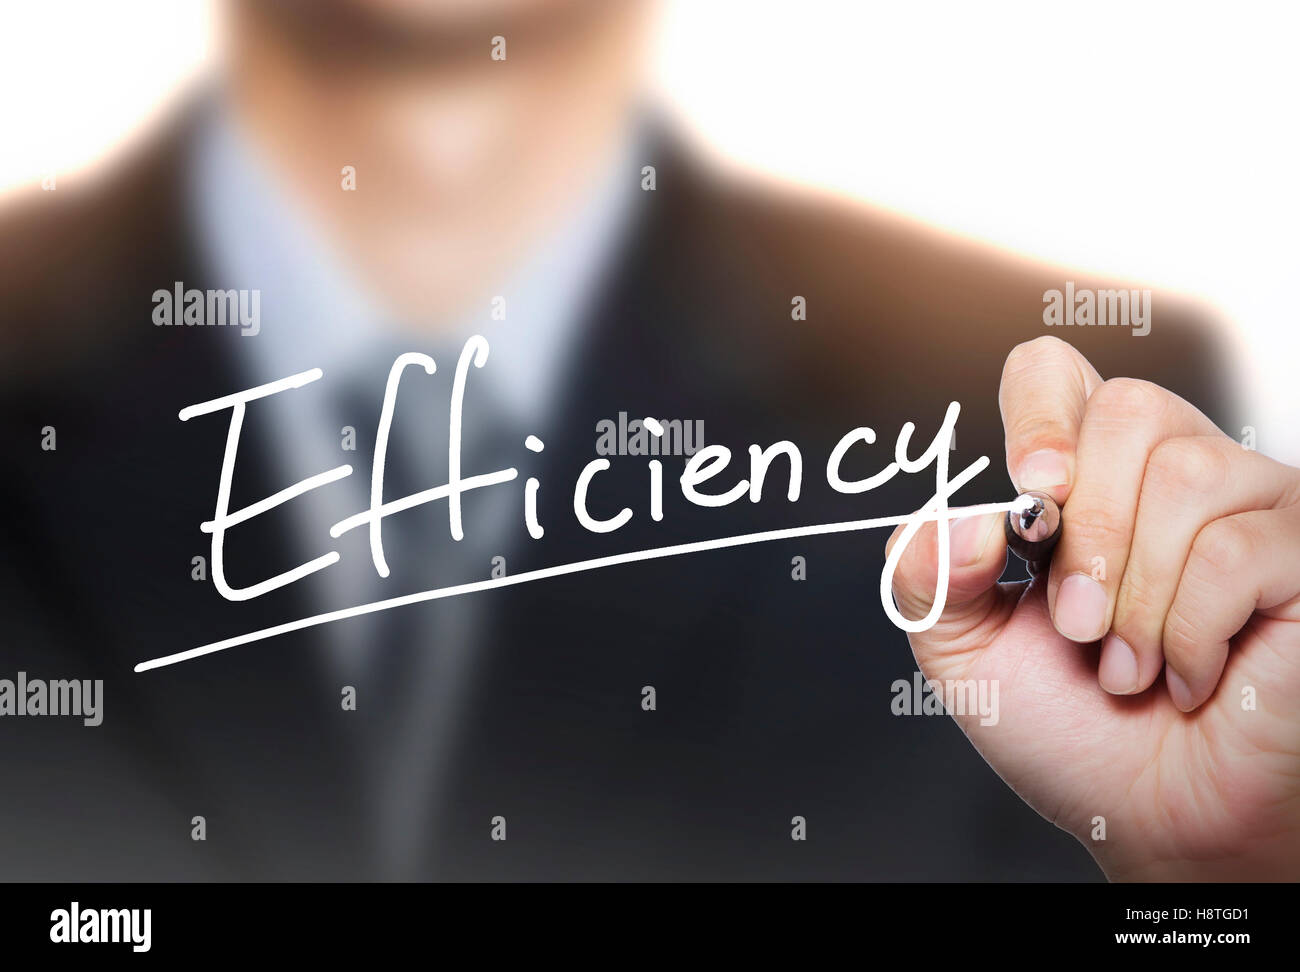 efficiency written by hand, hand writing on transparent board, photo Stock Photo